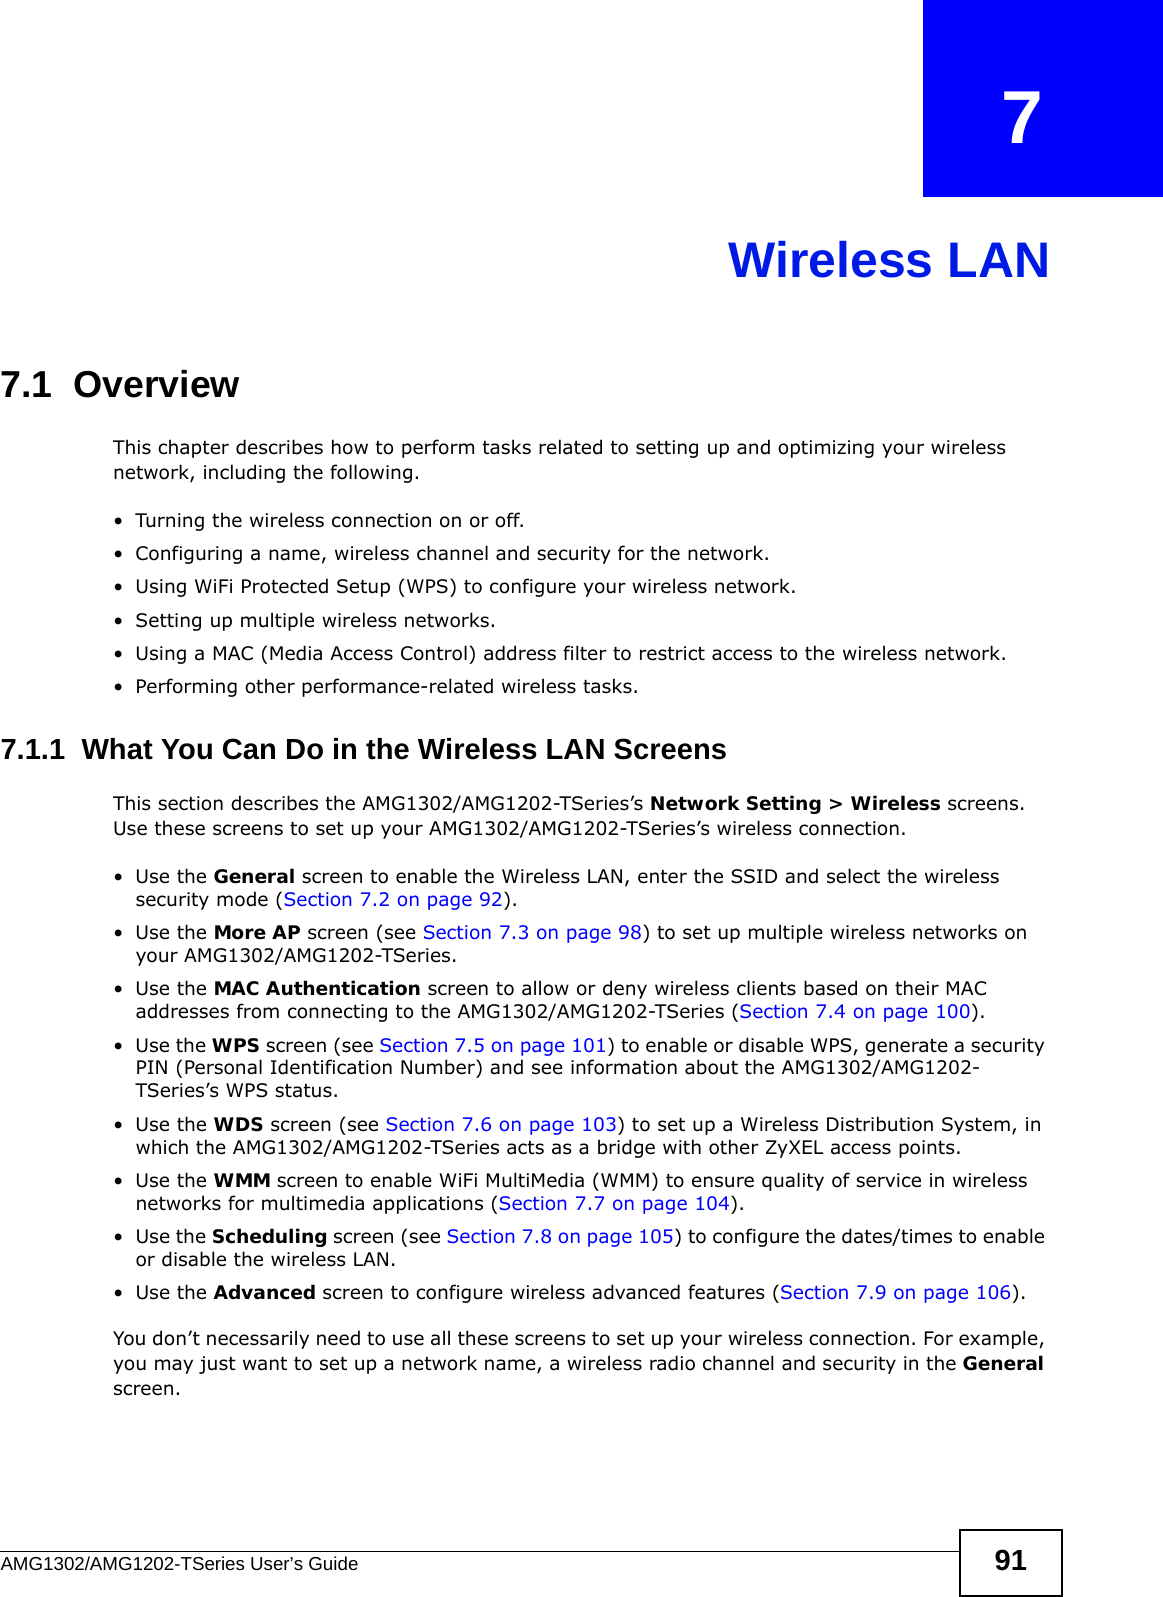 AMG1302/AMG1202-TSeries User’s Guide 91CHAPTER   7Wireless LAN7.1  Overview This chapter describes how to perform tasks related to setting up and optimizing your wireless network, including the following.• Turning the wireless connection on or off.• Configuring a name, wireless channel and security for the network.• Using WiFi Protected Setup (WPS) to configure your wireless network.• Setting up multiple wireless networks.• Using a MAC (Media Access Control) address filter to restrict access to the wireless network.• Performing other performance-related wireless tasks.7.1.1  What You Can Do in the Wireless LAN ScreensThis section describes the AMG1302/AMG1202-TSeries’s Network Setting &gt; Wireless screens. Use these screens to set up your AMG1302/AMG1202-TSeries’s wireless connection.•Use the General screen to enable the Wireless LAN, enter the SSID and select the wireless security mode (Section 7.2 on page 92).•Use the More AP screen (see Section 7.3 on page 98) to set up multiple wireless networks on your AMG1302/AMG1202-TSeries.•Use the MAC Authentication screen to allow or deny wireless clients based on their MAC addresses from connecting to the AMG1302/AMG1202-TSeries (Section 7.4 on page 100).•Use the WPS screen (see Section 7.5 on page 101) to enable or disable WPS, generate a security PIN (Personal Identification Number) and see information about the AMG1302/AMG1202-TSeries’s WPS status.•Use the WDS screen (see Section 7.6 on page 103) to set up a Wireless Distribution System, in which the AMG1302/AMG1202-TSeries acts as a bridge with other ZyXEL access points.•Use the WMM screen to enable WiFi MultiMedia (WMM) to ensure quality of service in wireless networks for multimedia applications (Section 7.7 on page 104). •Use the Scheduling screen (see Section 7.8 on page 105) to configure the dates/times to enable or disable the wireless LAN.•Use the Advanced screen to configure wireless advanced features (Section 7.9 on page 106).You don’t necessarily need to use all these screens to set up your wireless connection. For example, you may just want to set up a network name, a wireless radio channel and security in the General screen.